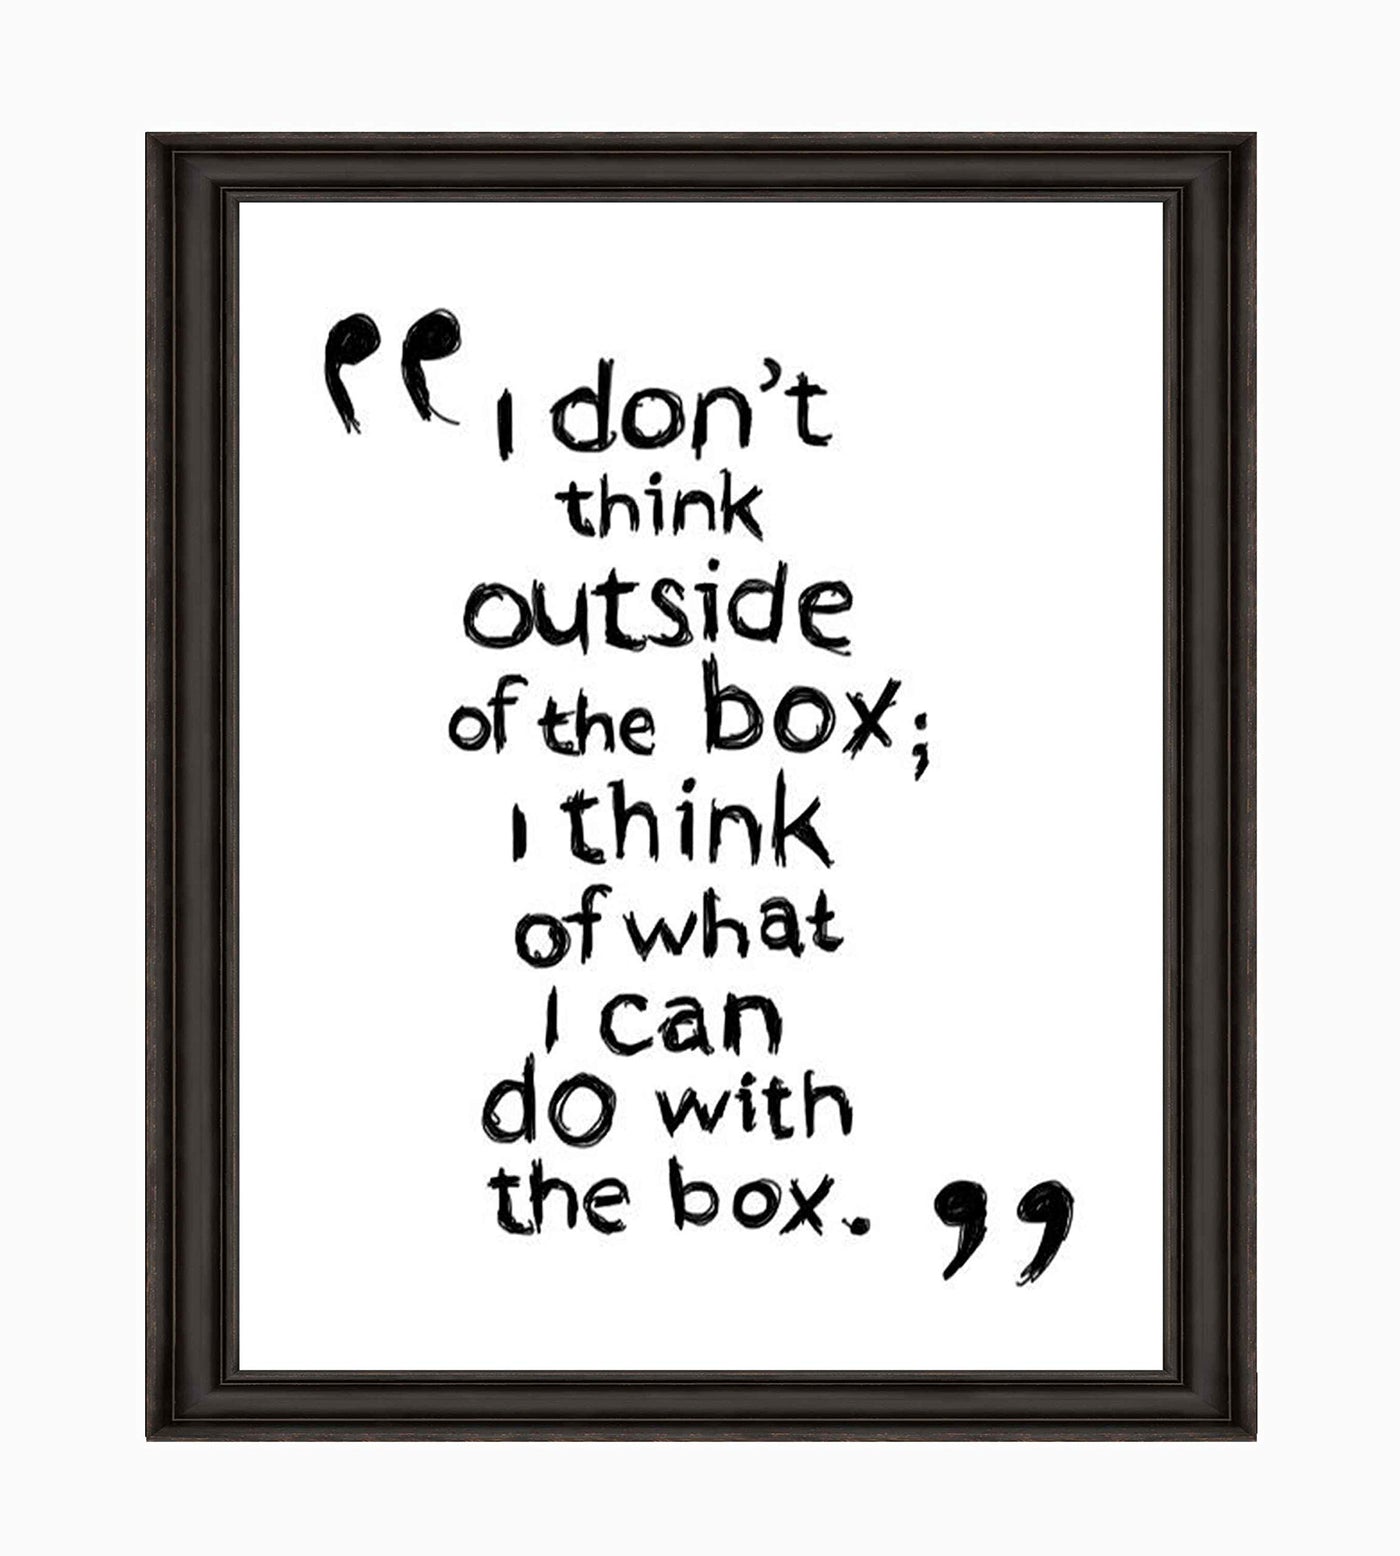 I Don't Think Outside the Box Funny Wall Art Sign -8 x 10" Humorous Typographic Poster Print-Ready to Frame. Ideal Home-Office-Bar-Shop-Cave Decor. Perfect Desk-Cubicle Sign. Fun Novelty Gift!